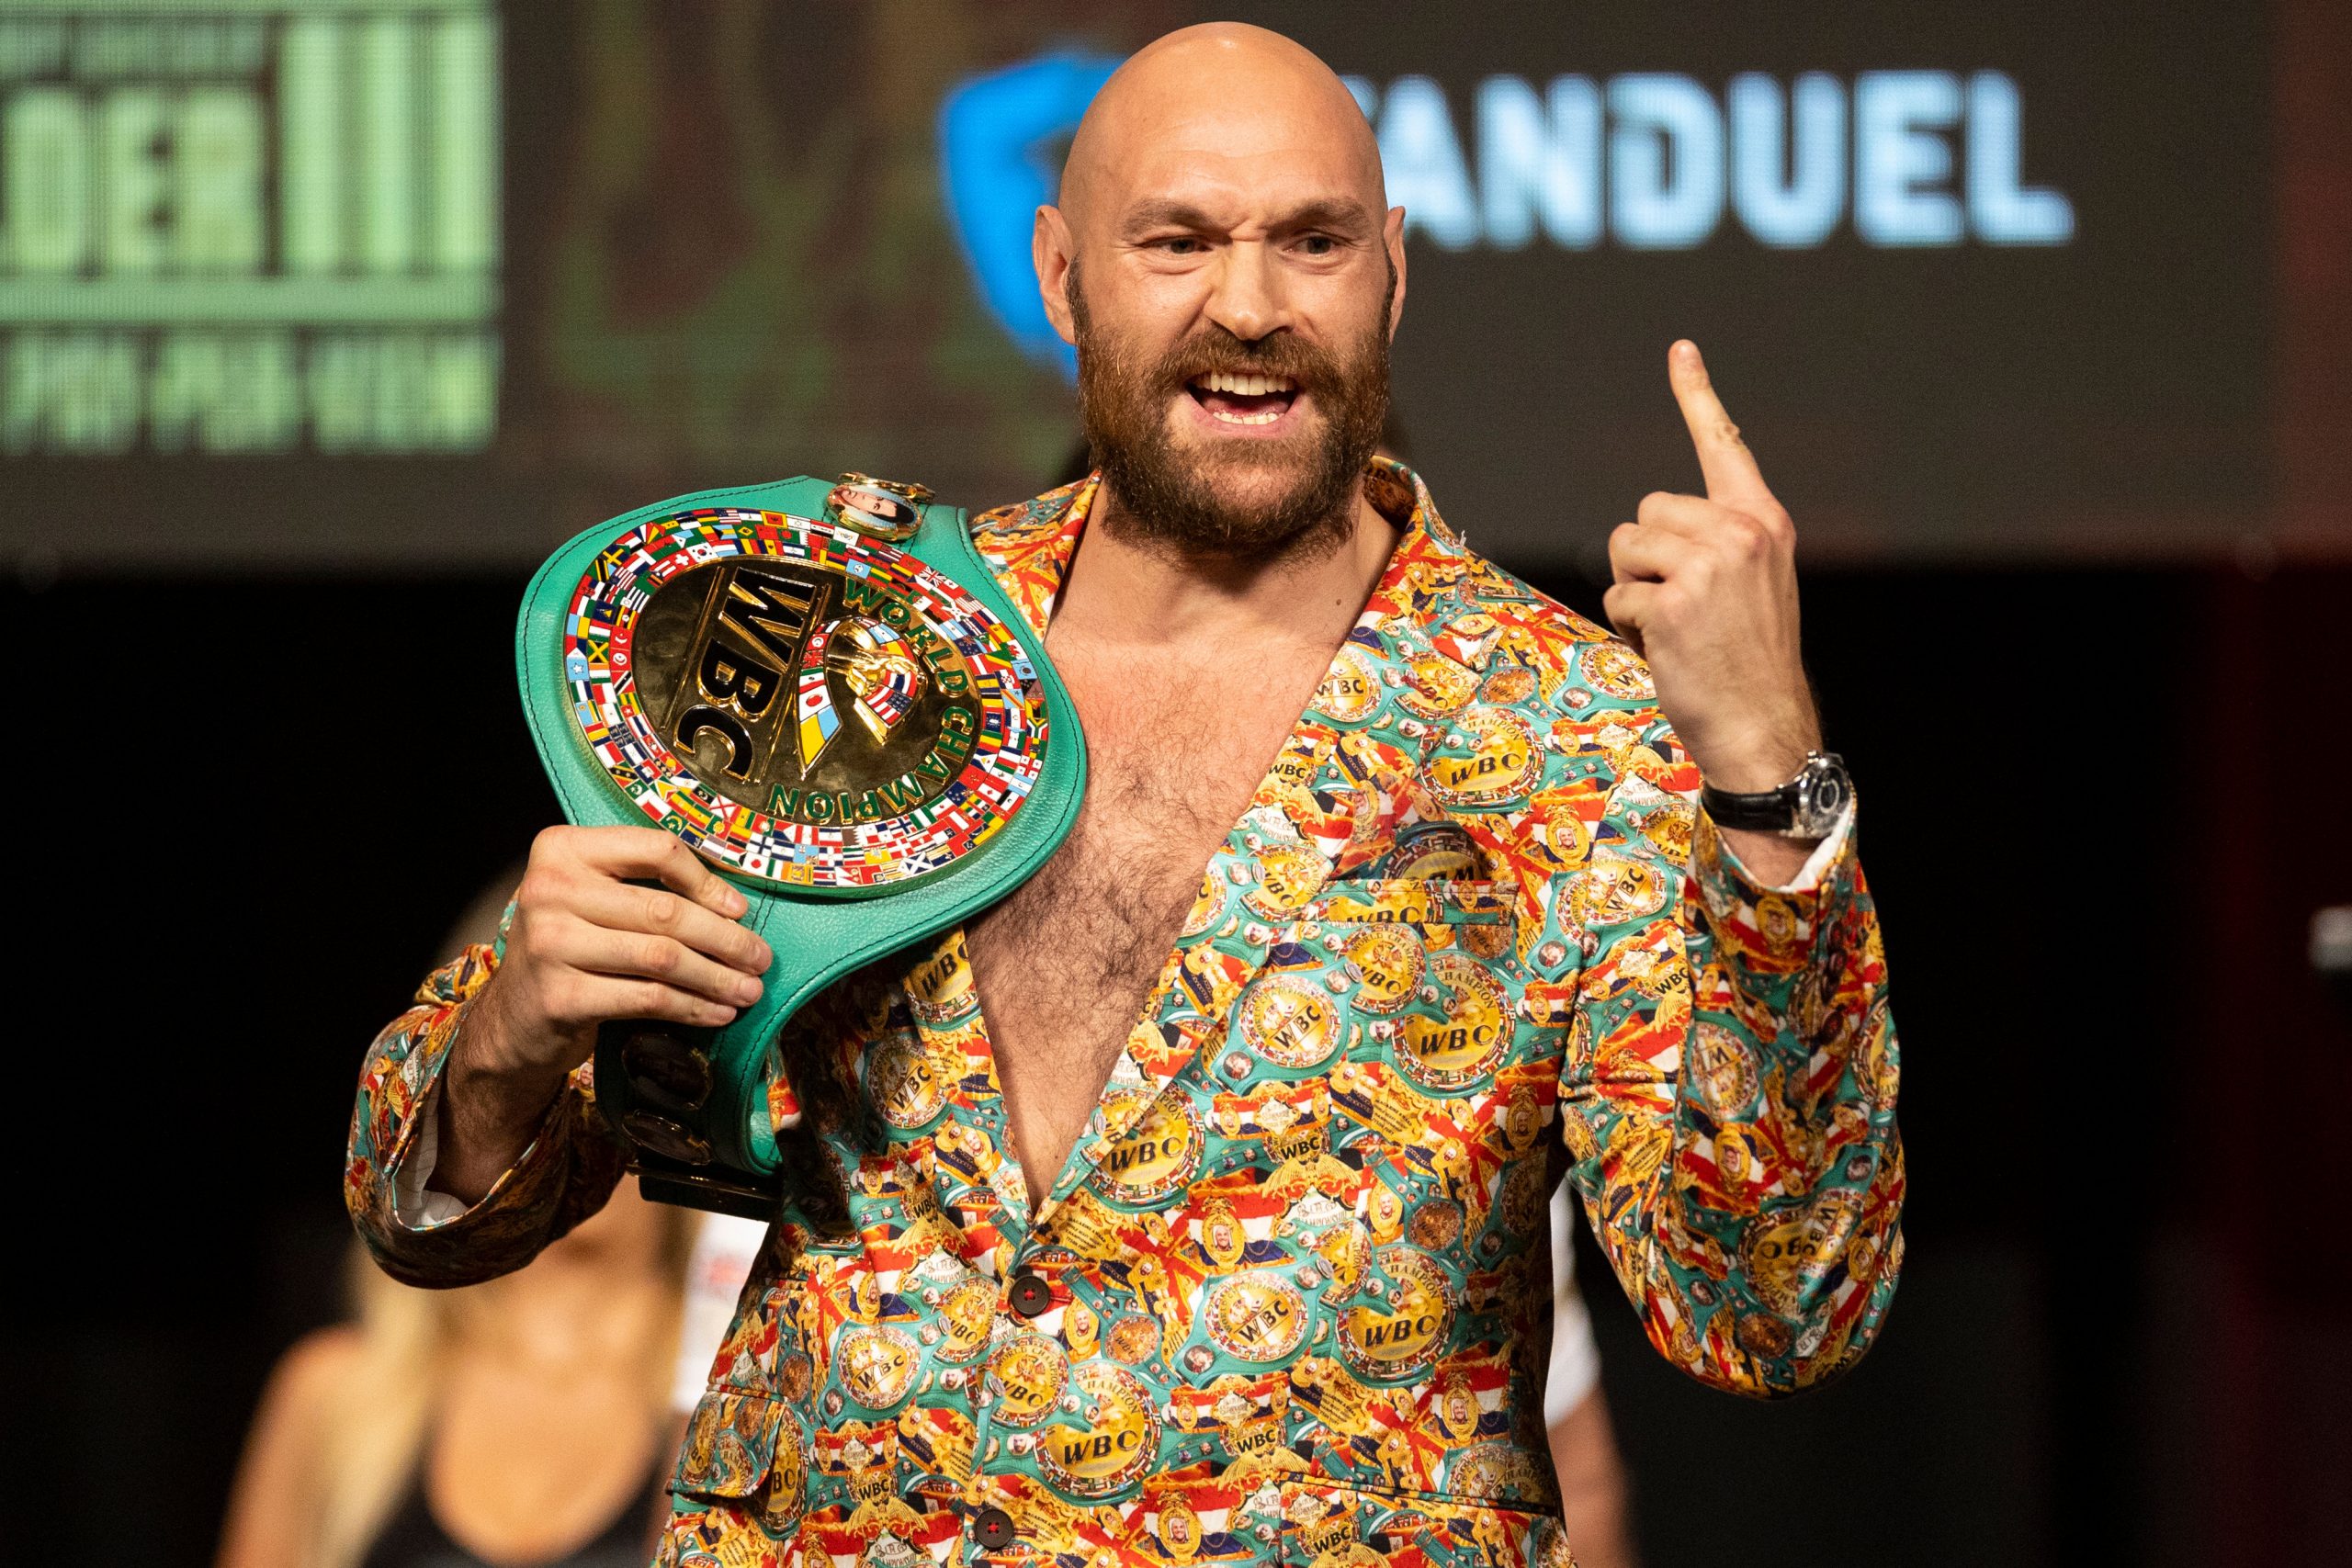 Tyson Fury, the Boxing champ also known as ‘Gypsy King’